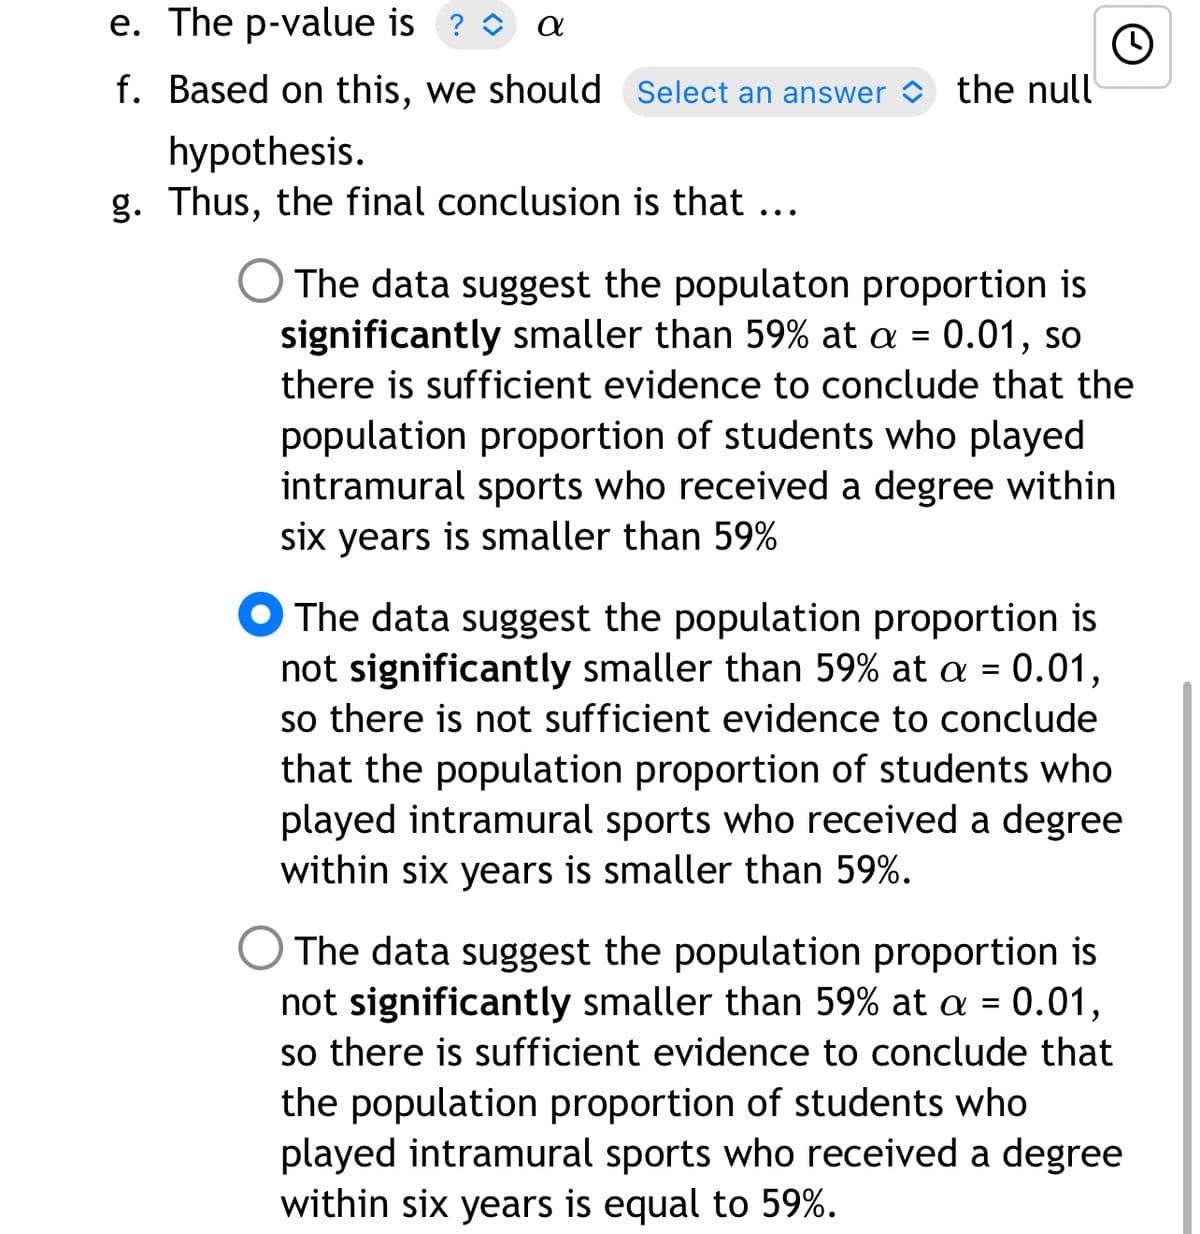 e. The p-value is ? O
f. Based on this, we should Select an answer
the null
hypothesis.
g. Thus, the final conclusion is that ...
O The data suggest the populaton proportion is
significantly smaller than 59% at a = 0.01, so
there is sufficient evidence to conclude that the
population proportion of students who played
intramural sports who received a degree within
six years is smaller than 59%
O The data suggest the population proportion is
not significantly smaller than 59% at a = 0.01,
so there is not sufficient evidence to conclude
that the population proportion of students who
played intramural sports who received a degree
within six years is smaller than 59%.
The data suggest the population proportion is
not significantly smaller than 59% at a = 0.01,
so there is sufficient evidence to conclude that
the population proportion of students who
played intramural sports who received a degree
within six years is equal to 59%.
